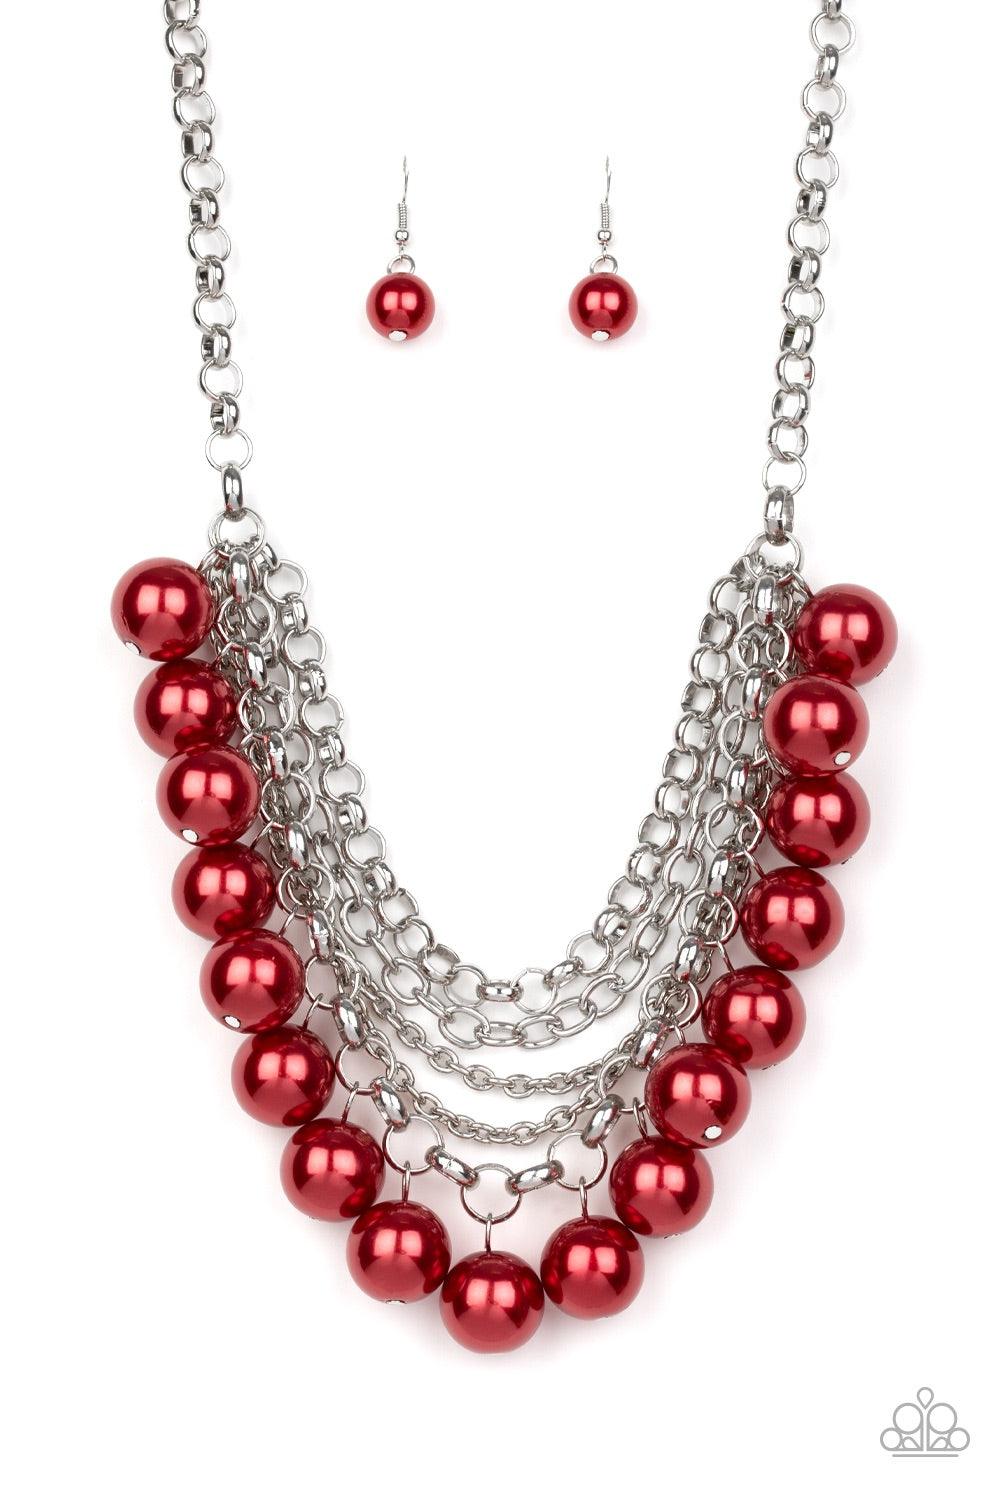 Paparazzi Accessories One-Way WALL Street - Red A collision of mismatched silver chains layer below the collar. Oversized red pearls dangle from the lowermost chain, creating a dramatically refined fringe for a statement-making finish. Features an adjusta